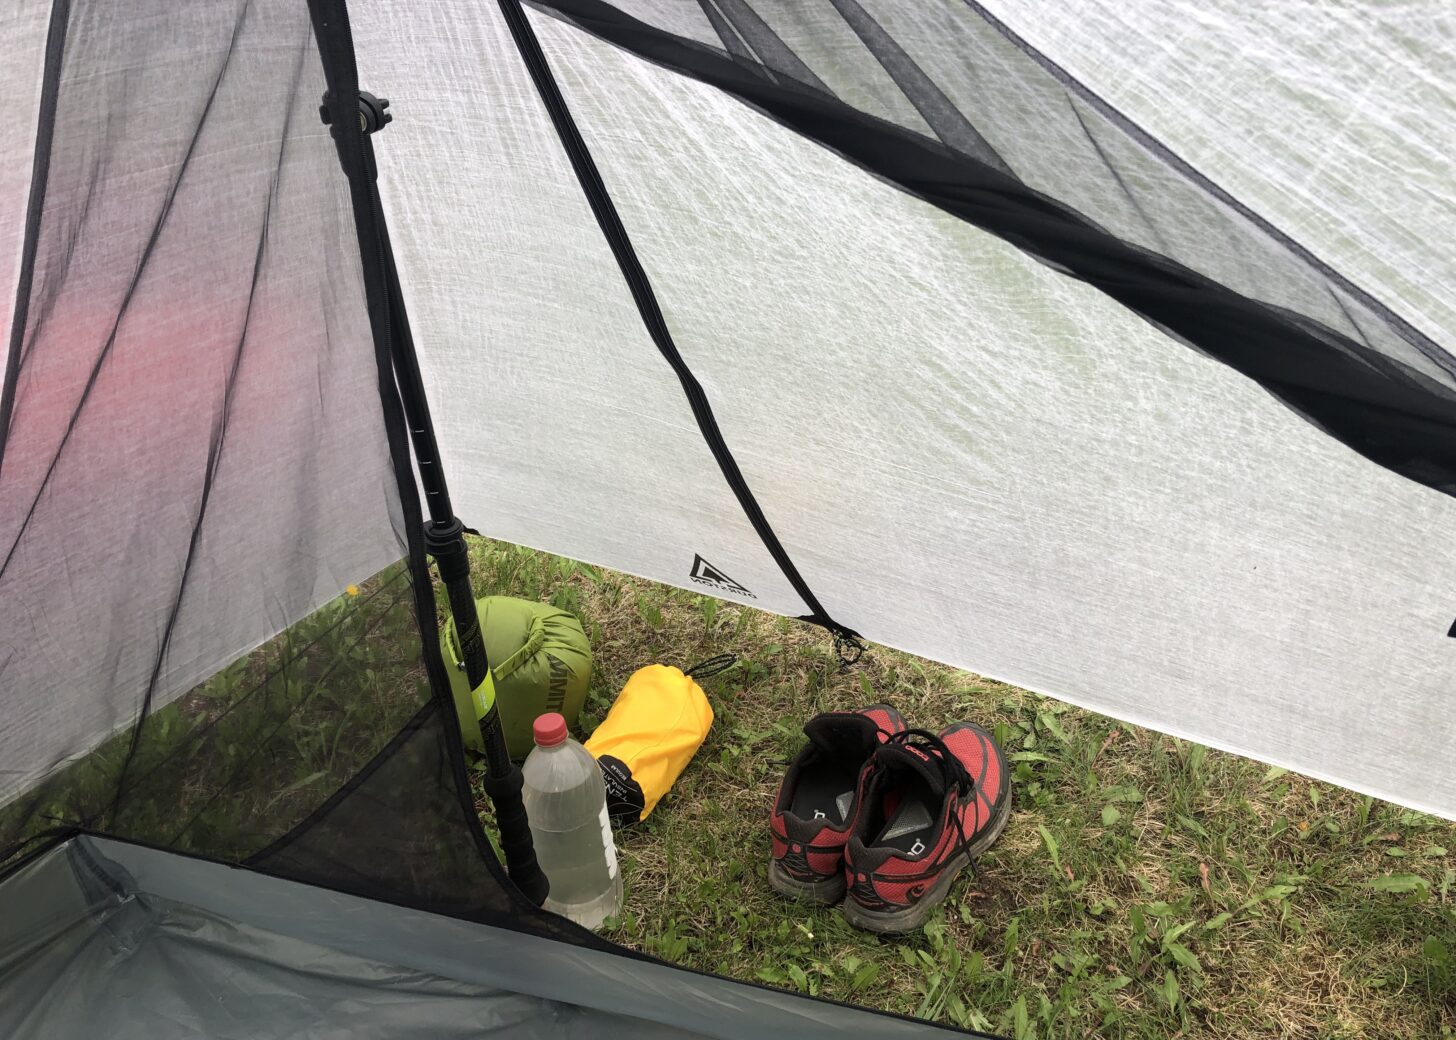 Shoes, a water bottle, and two small items are shown under a tent vestibule.